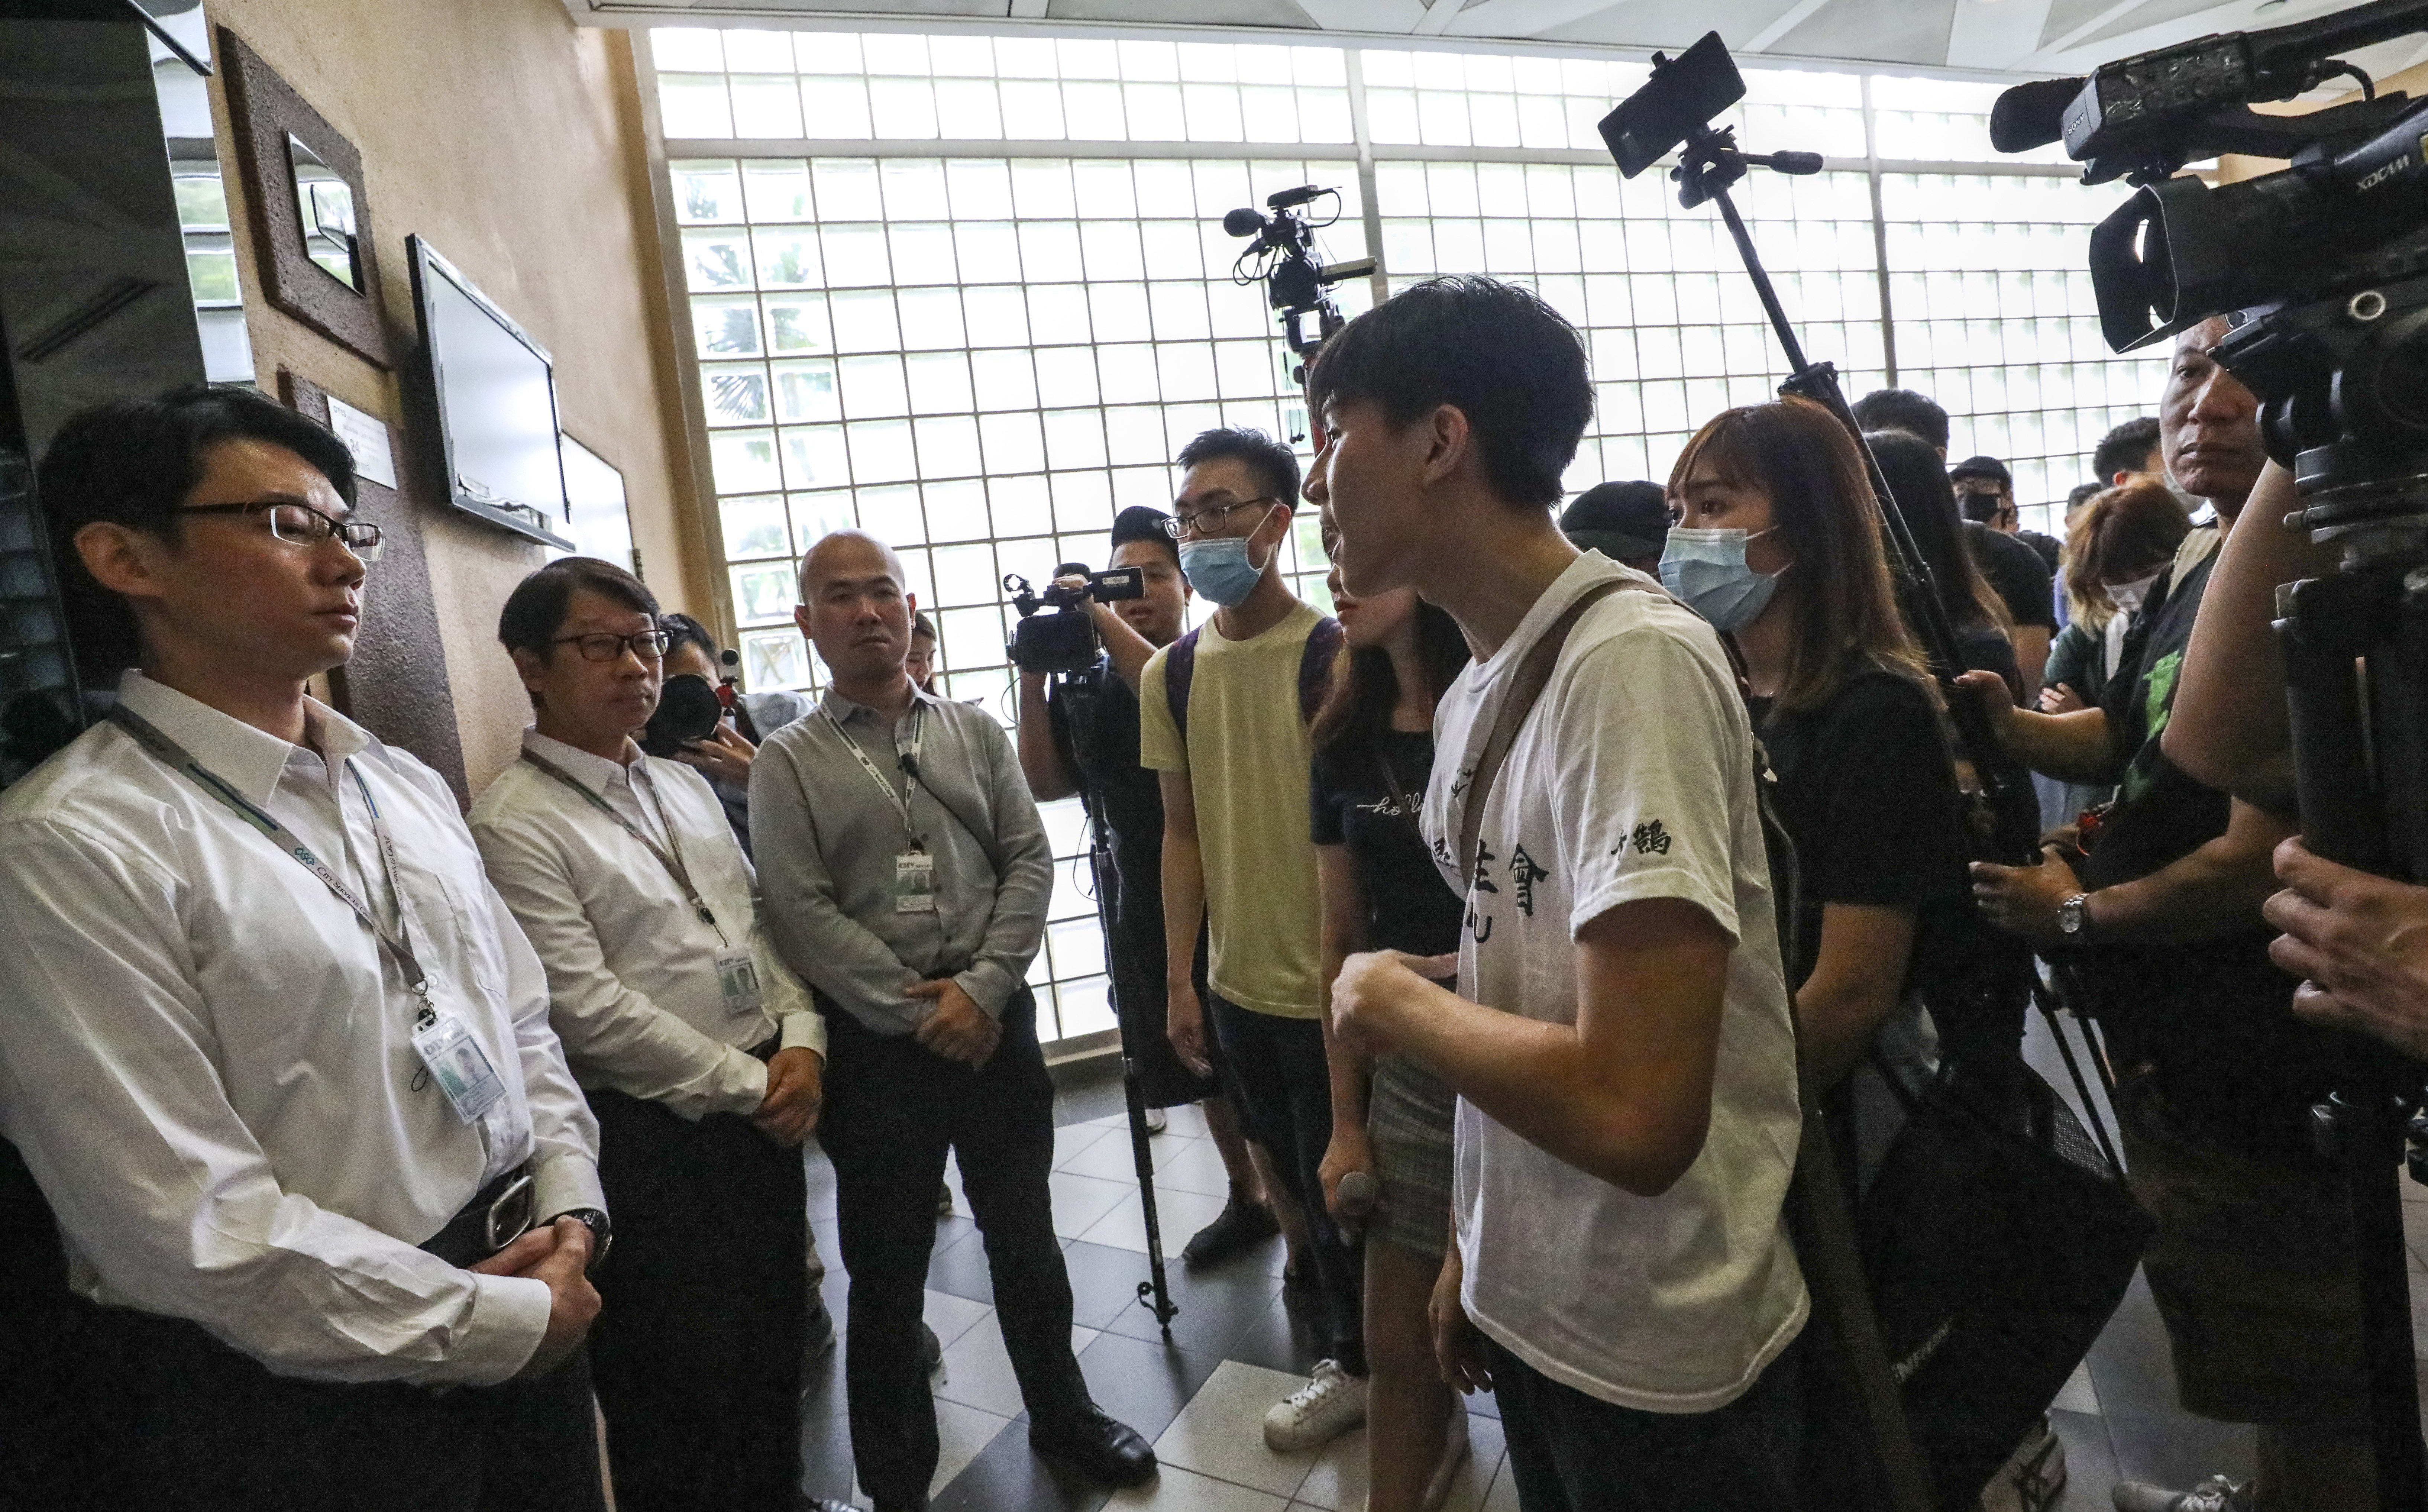 Student protesters at Baptist University in Kowloon Tong are blocked by security guards as they head for the principal’s office on September 18. The protesters felt the university had failed to adequately support a campus reporter who was arrested while covering the anti-government protests. Photo: Dickson Lee